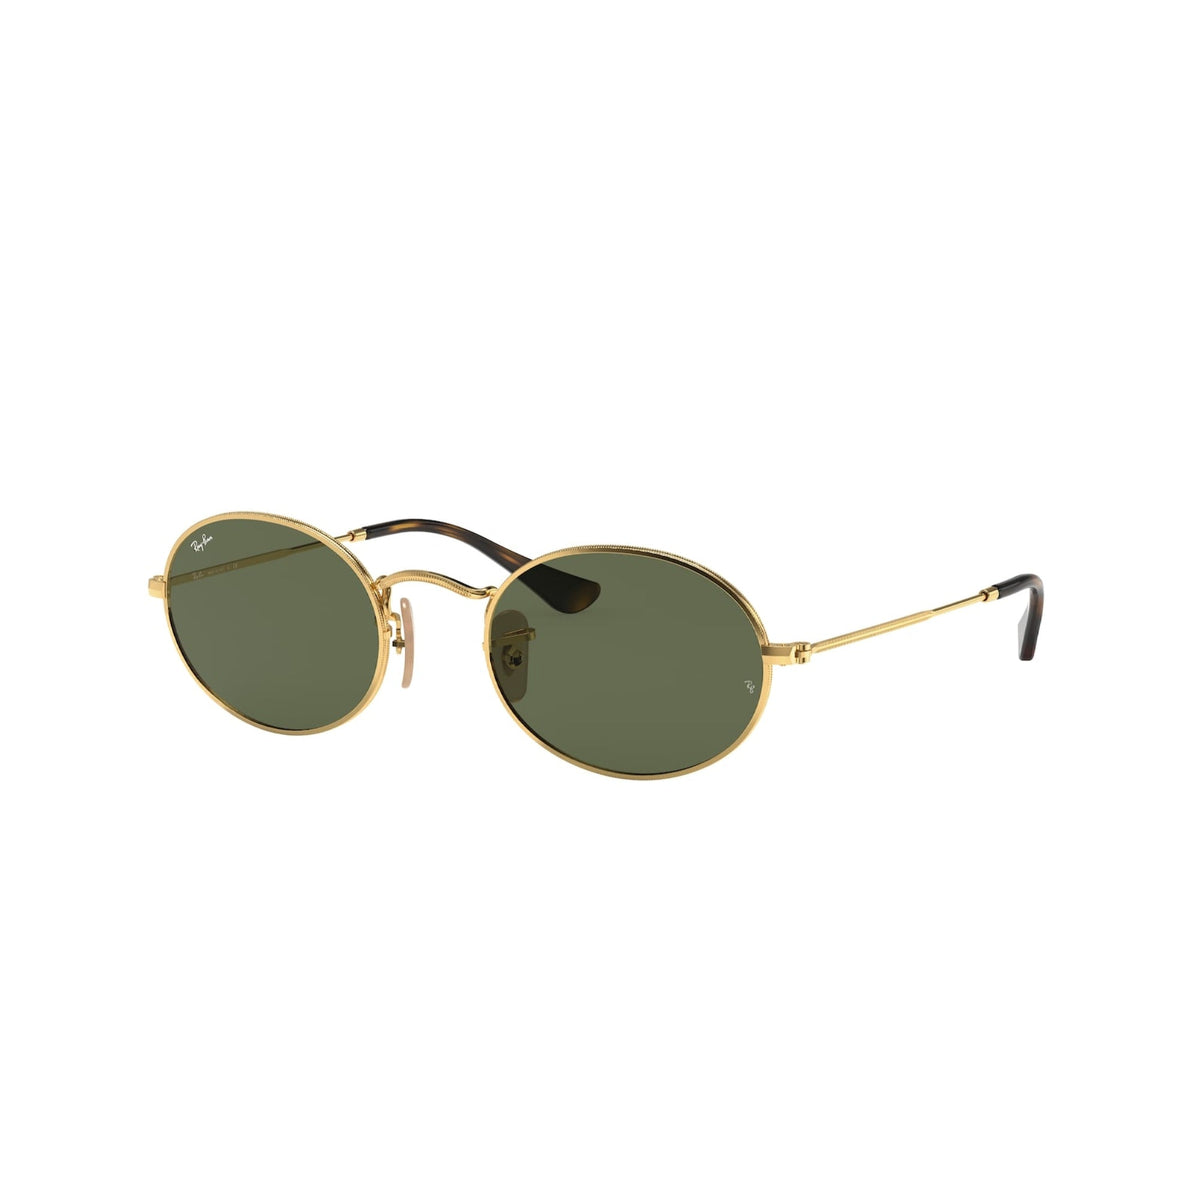 Ray-Ban Unisex Sunglasses Oval Gold G-15 Green Metal Metal  0RB3547N 001 51